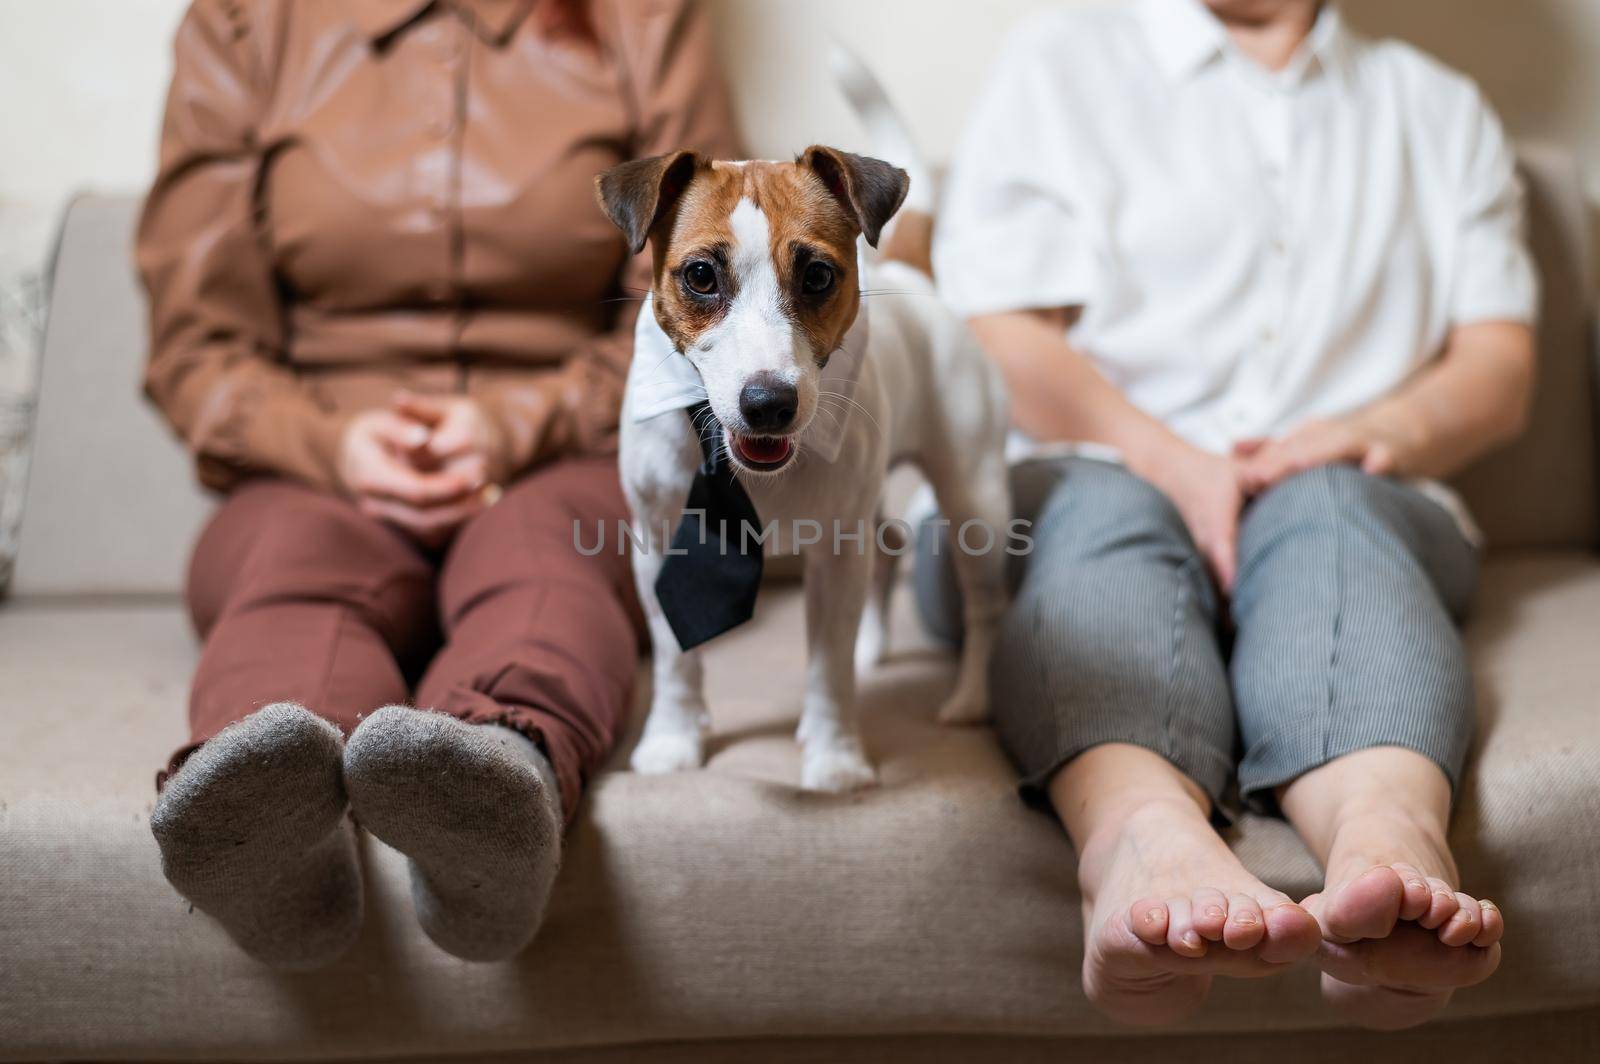 A cute dog Jack Russell Terrier is wearing a tie and sitting with two women on the couch.